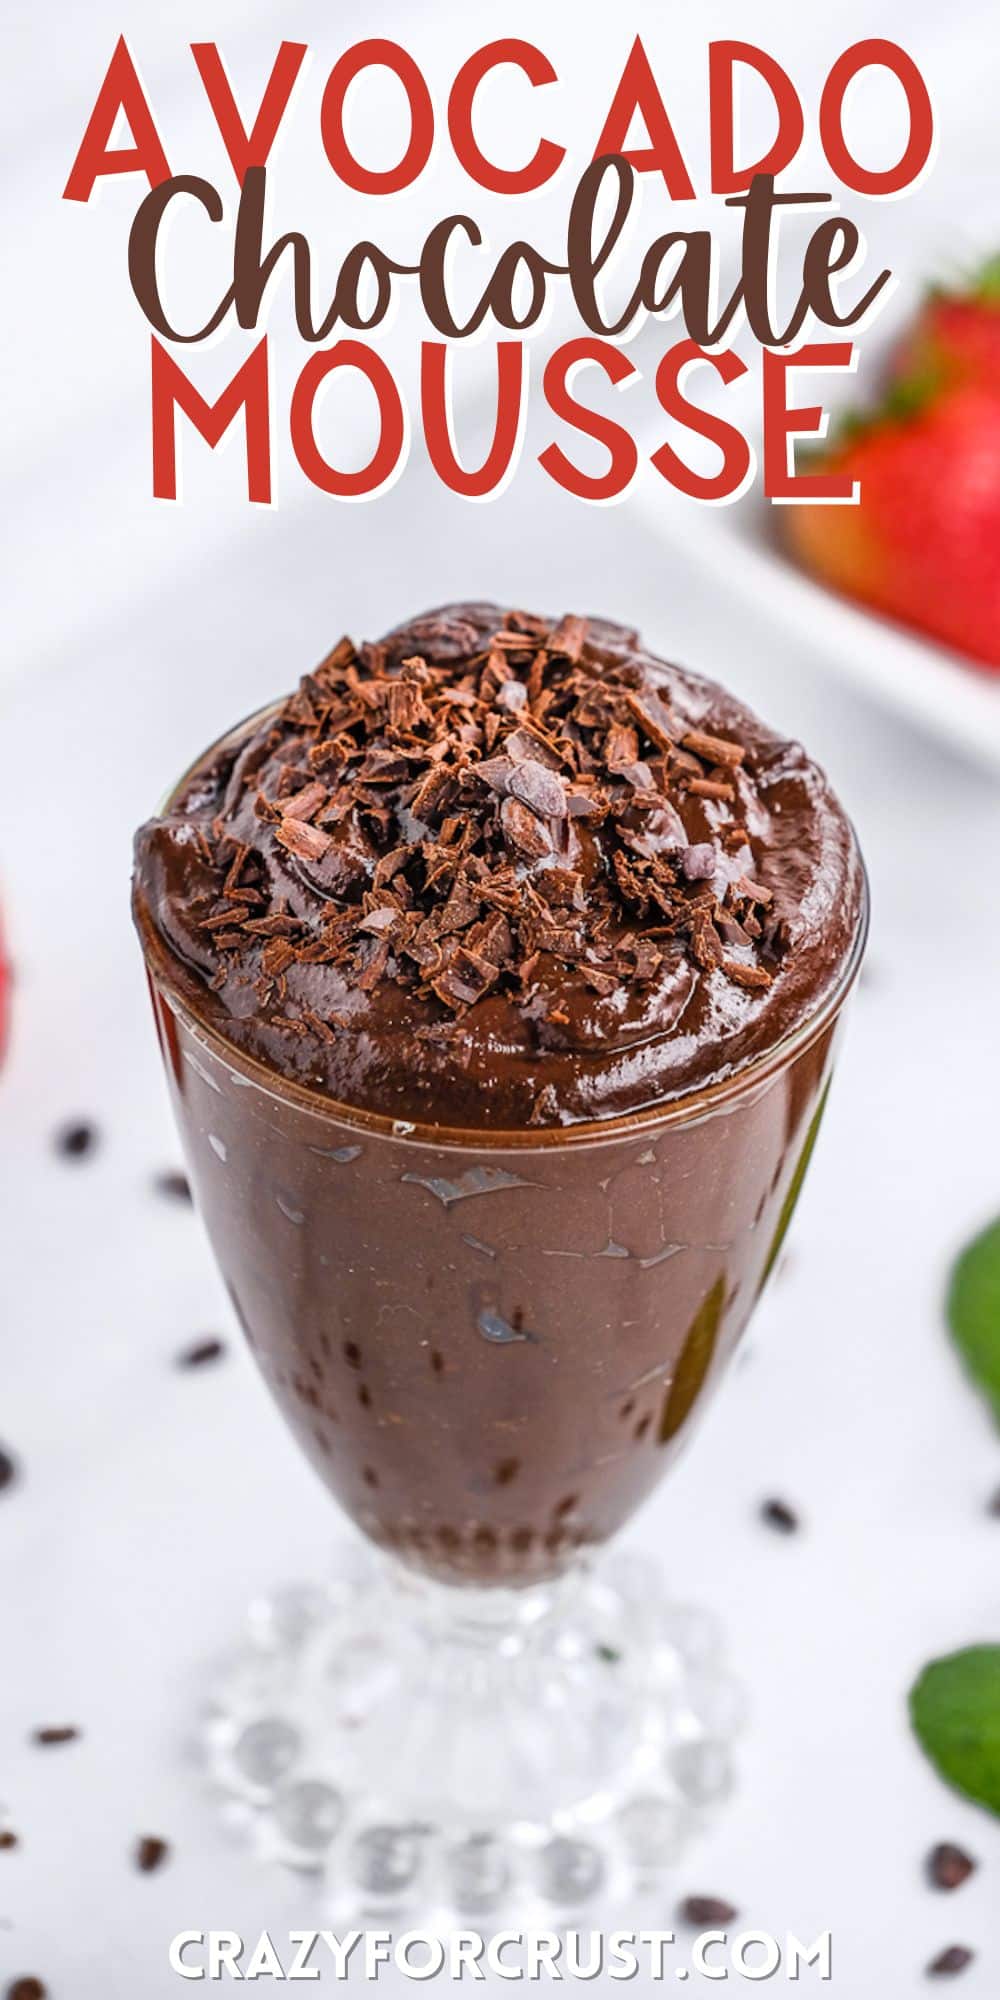 chocolate mousse in a tall clear glass with chocolate shavings on top with words on the image.